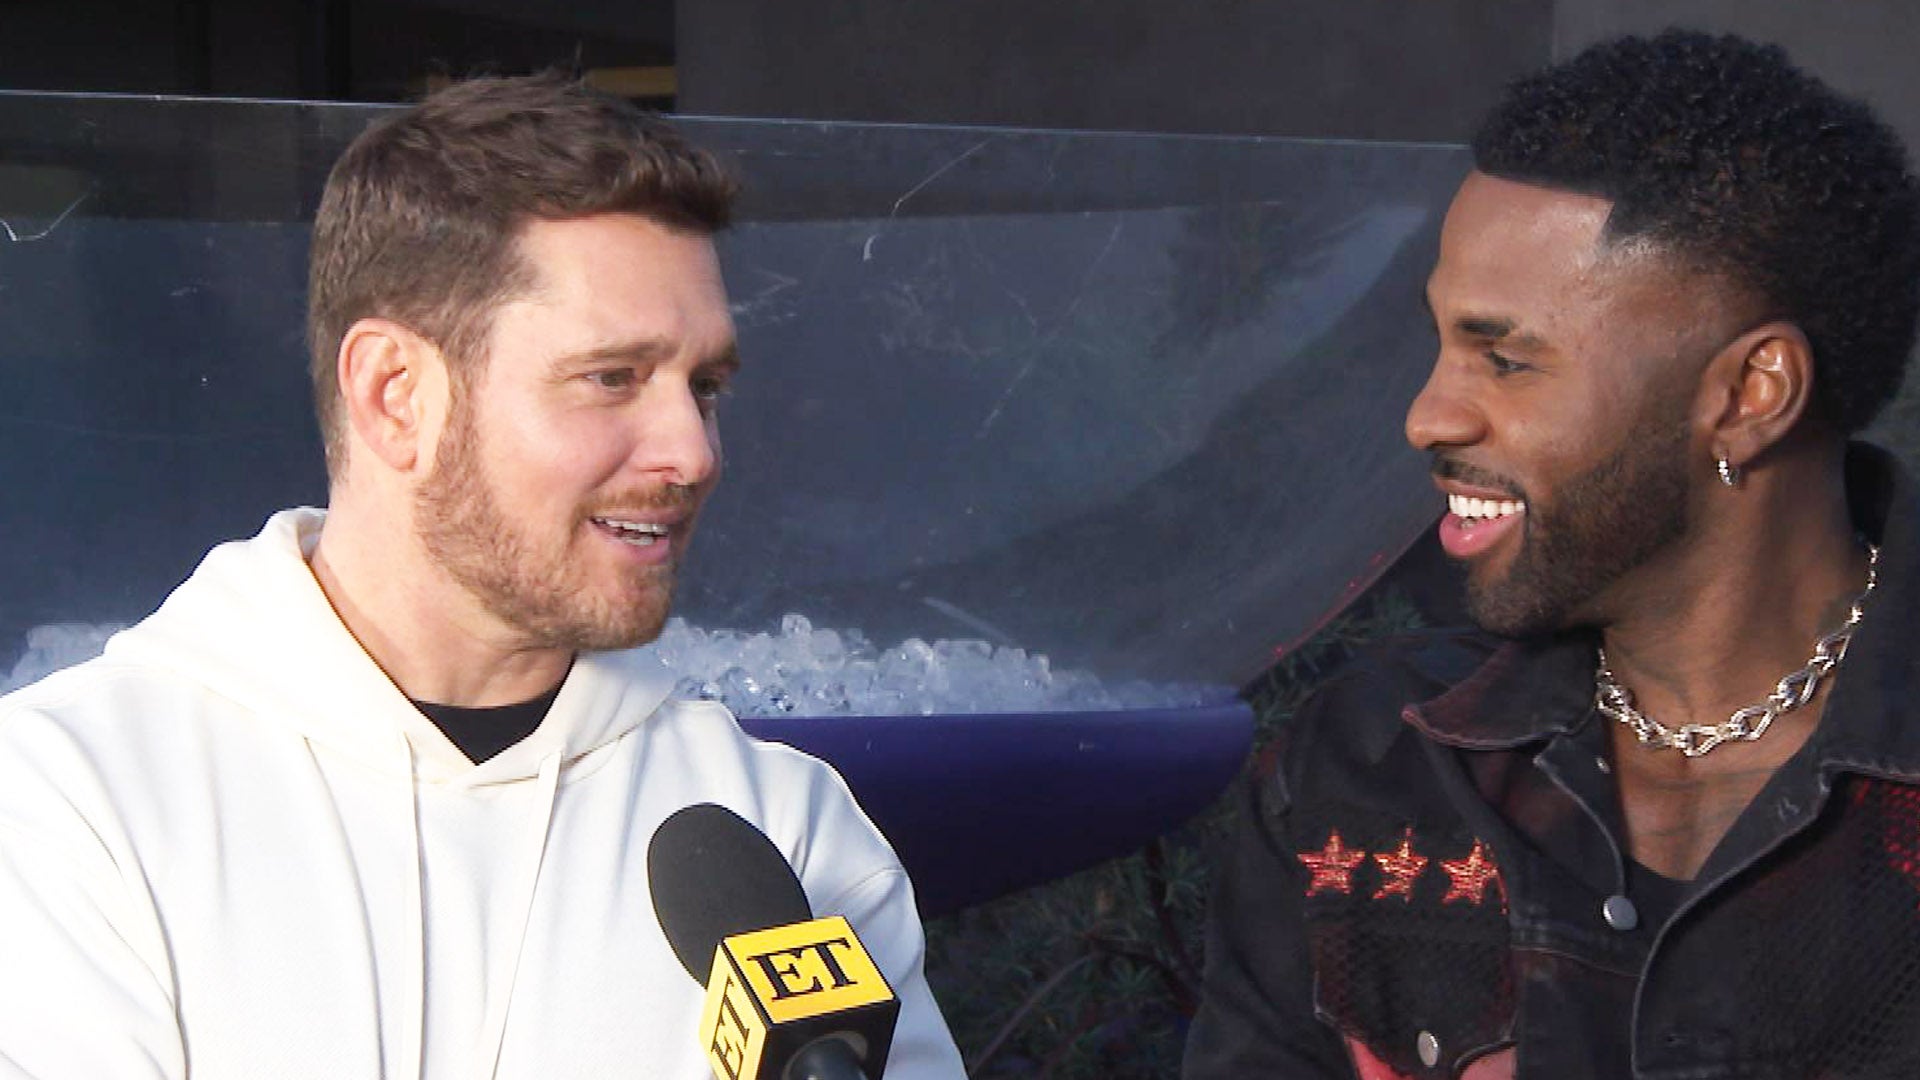 Jason Derulo and Michael Bublé on How They Became a Musical Duo (Exclusive)